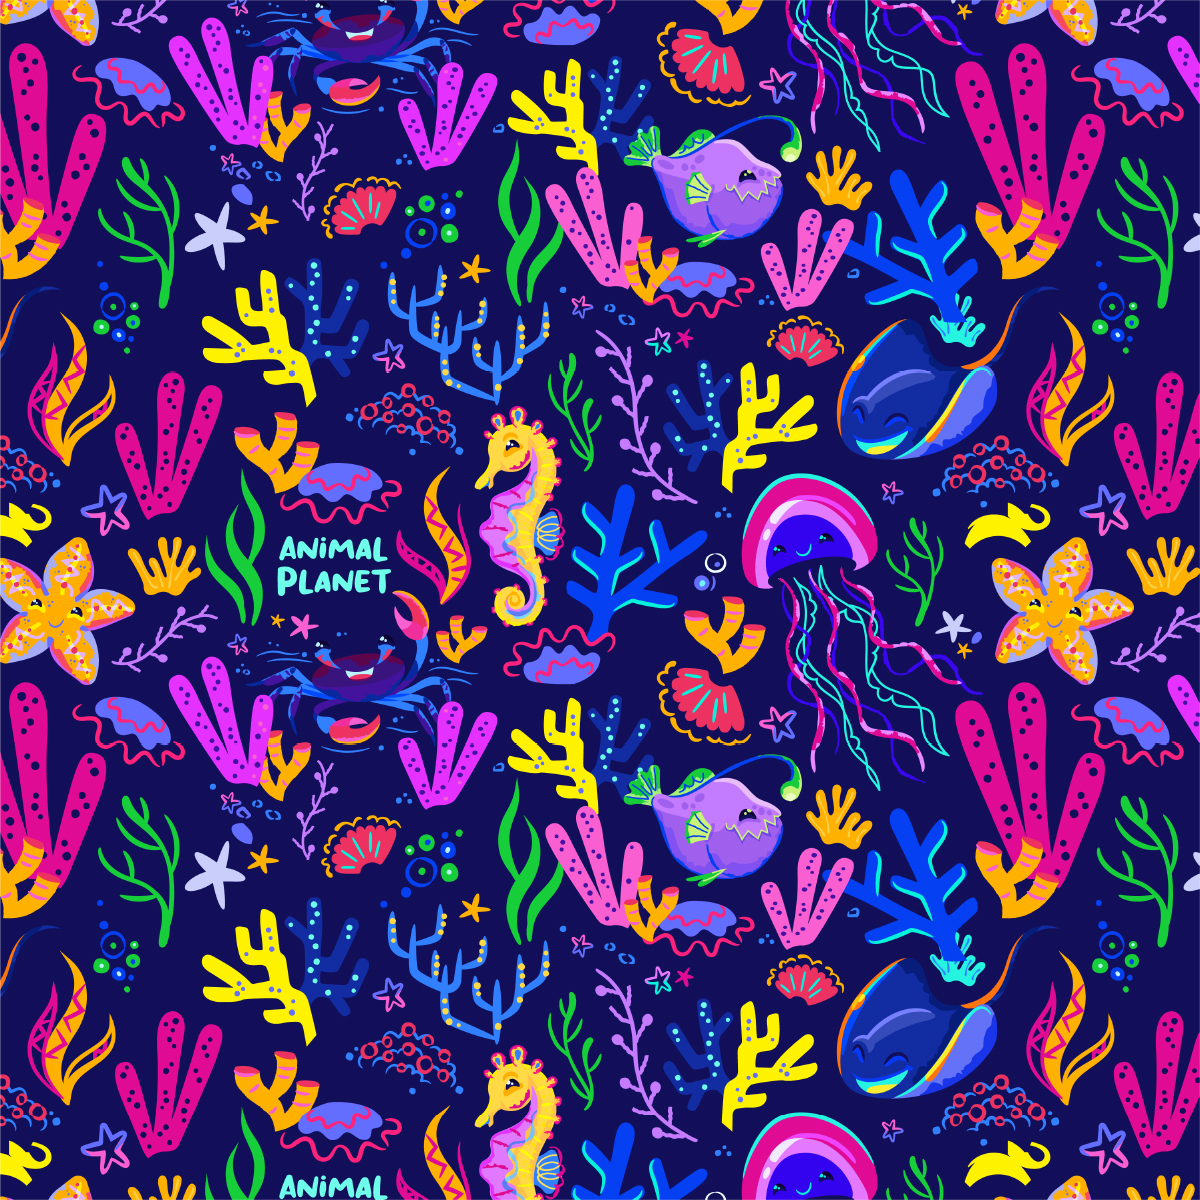 Pattern from Under the Sea collection featuring character art of aquatic wildlife and habitat elements.